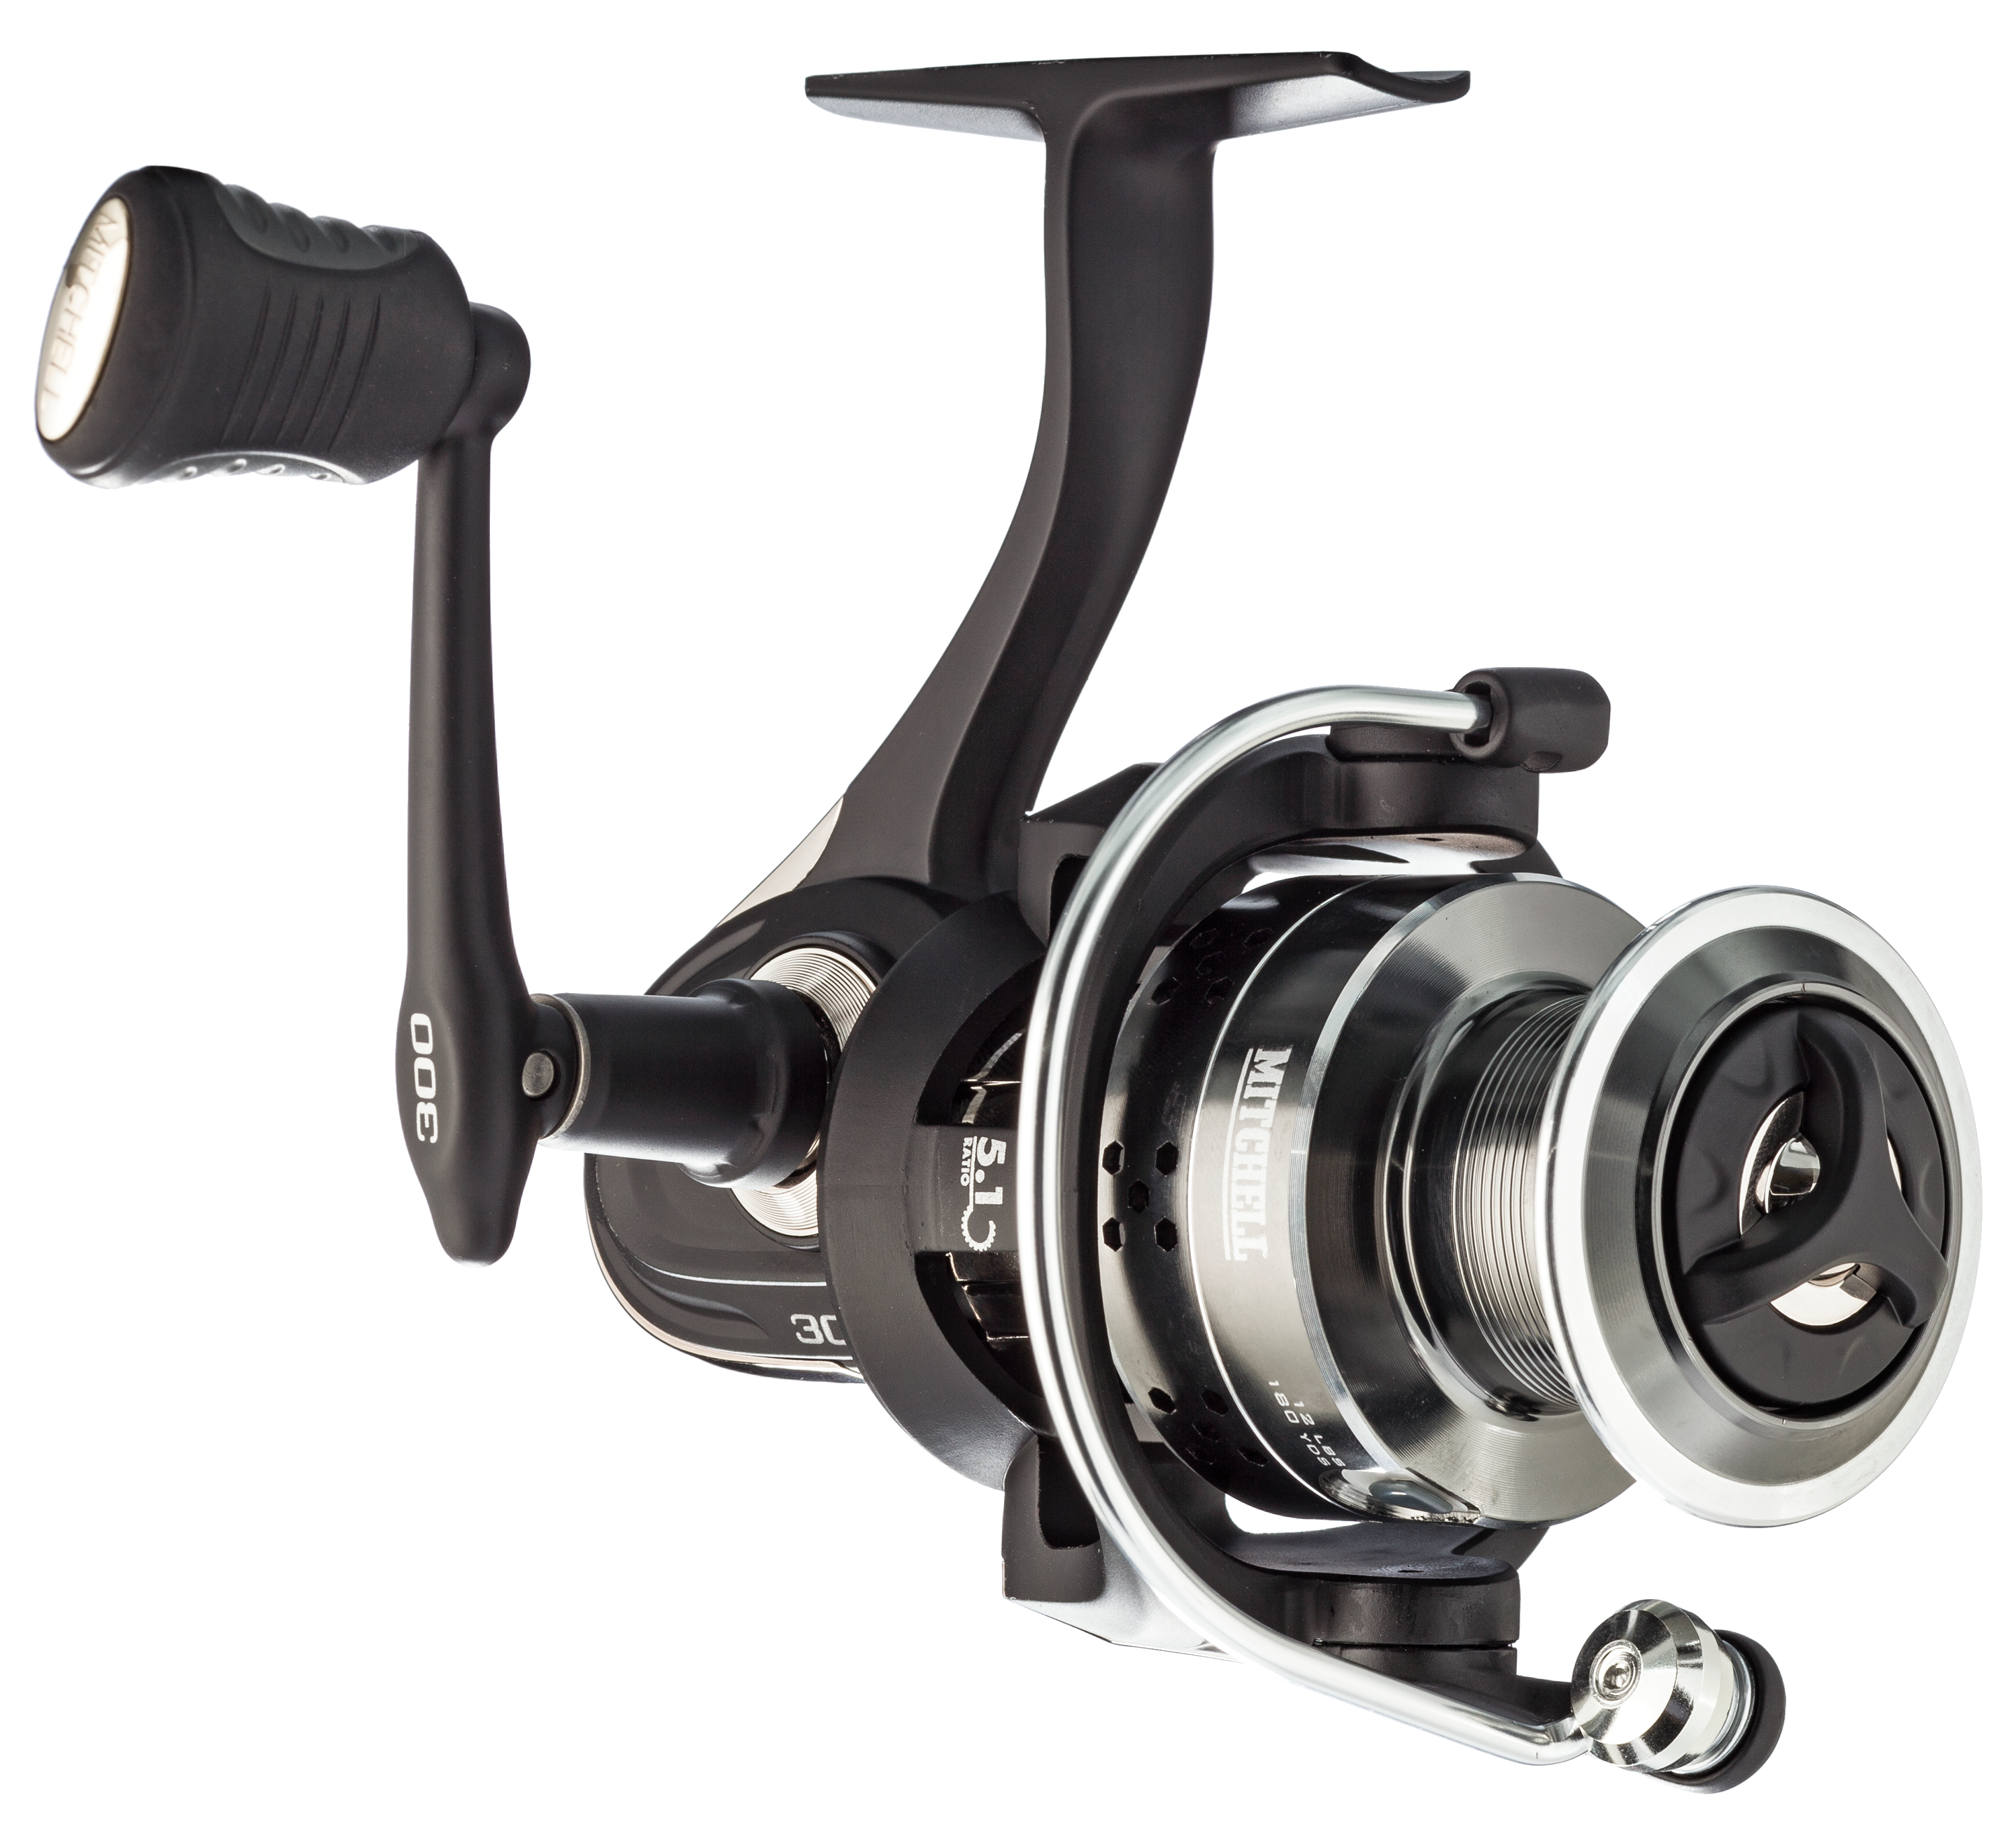 Garcia Mitchell 308 Ultra-lite Reel Made in France, Sports